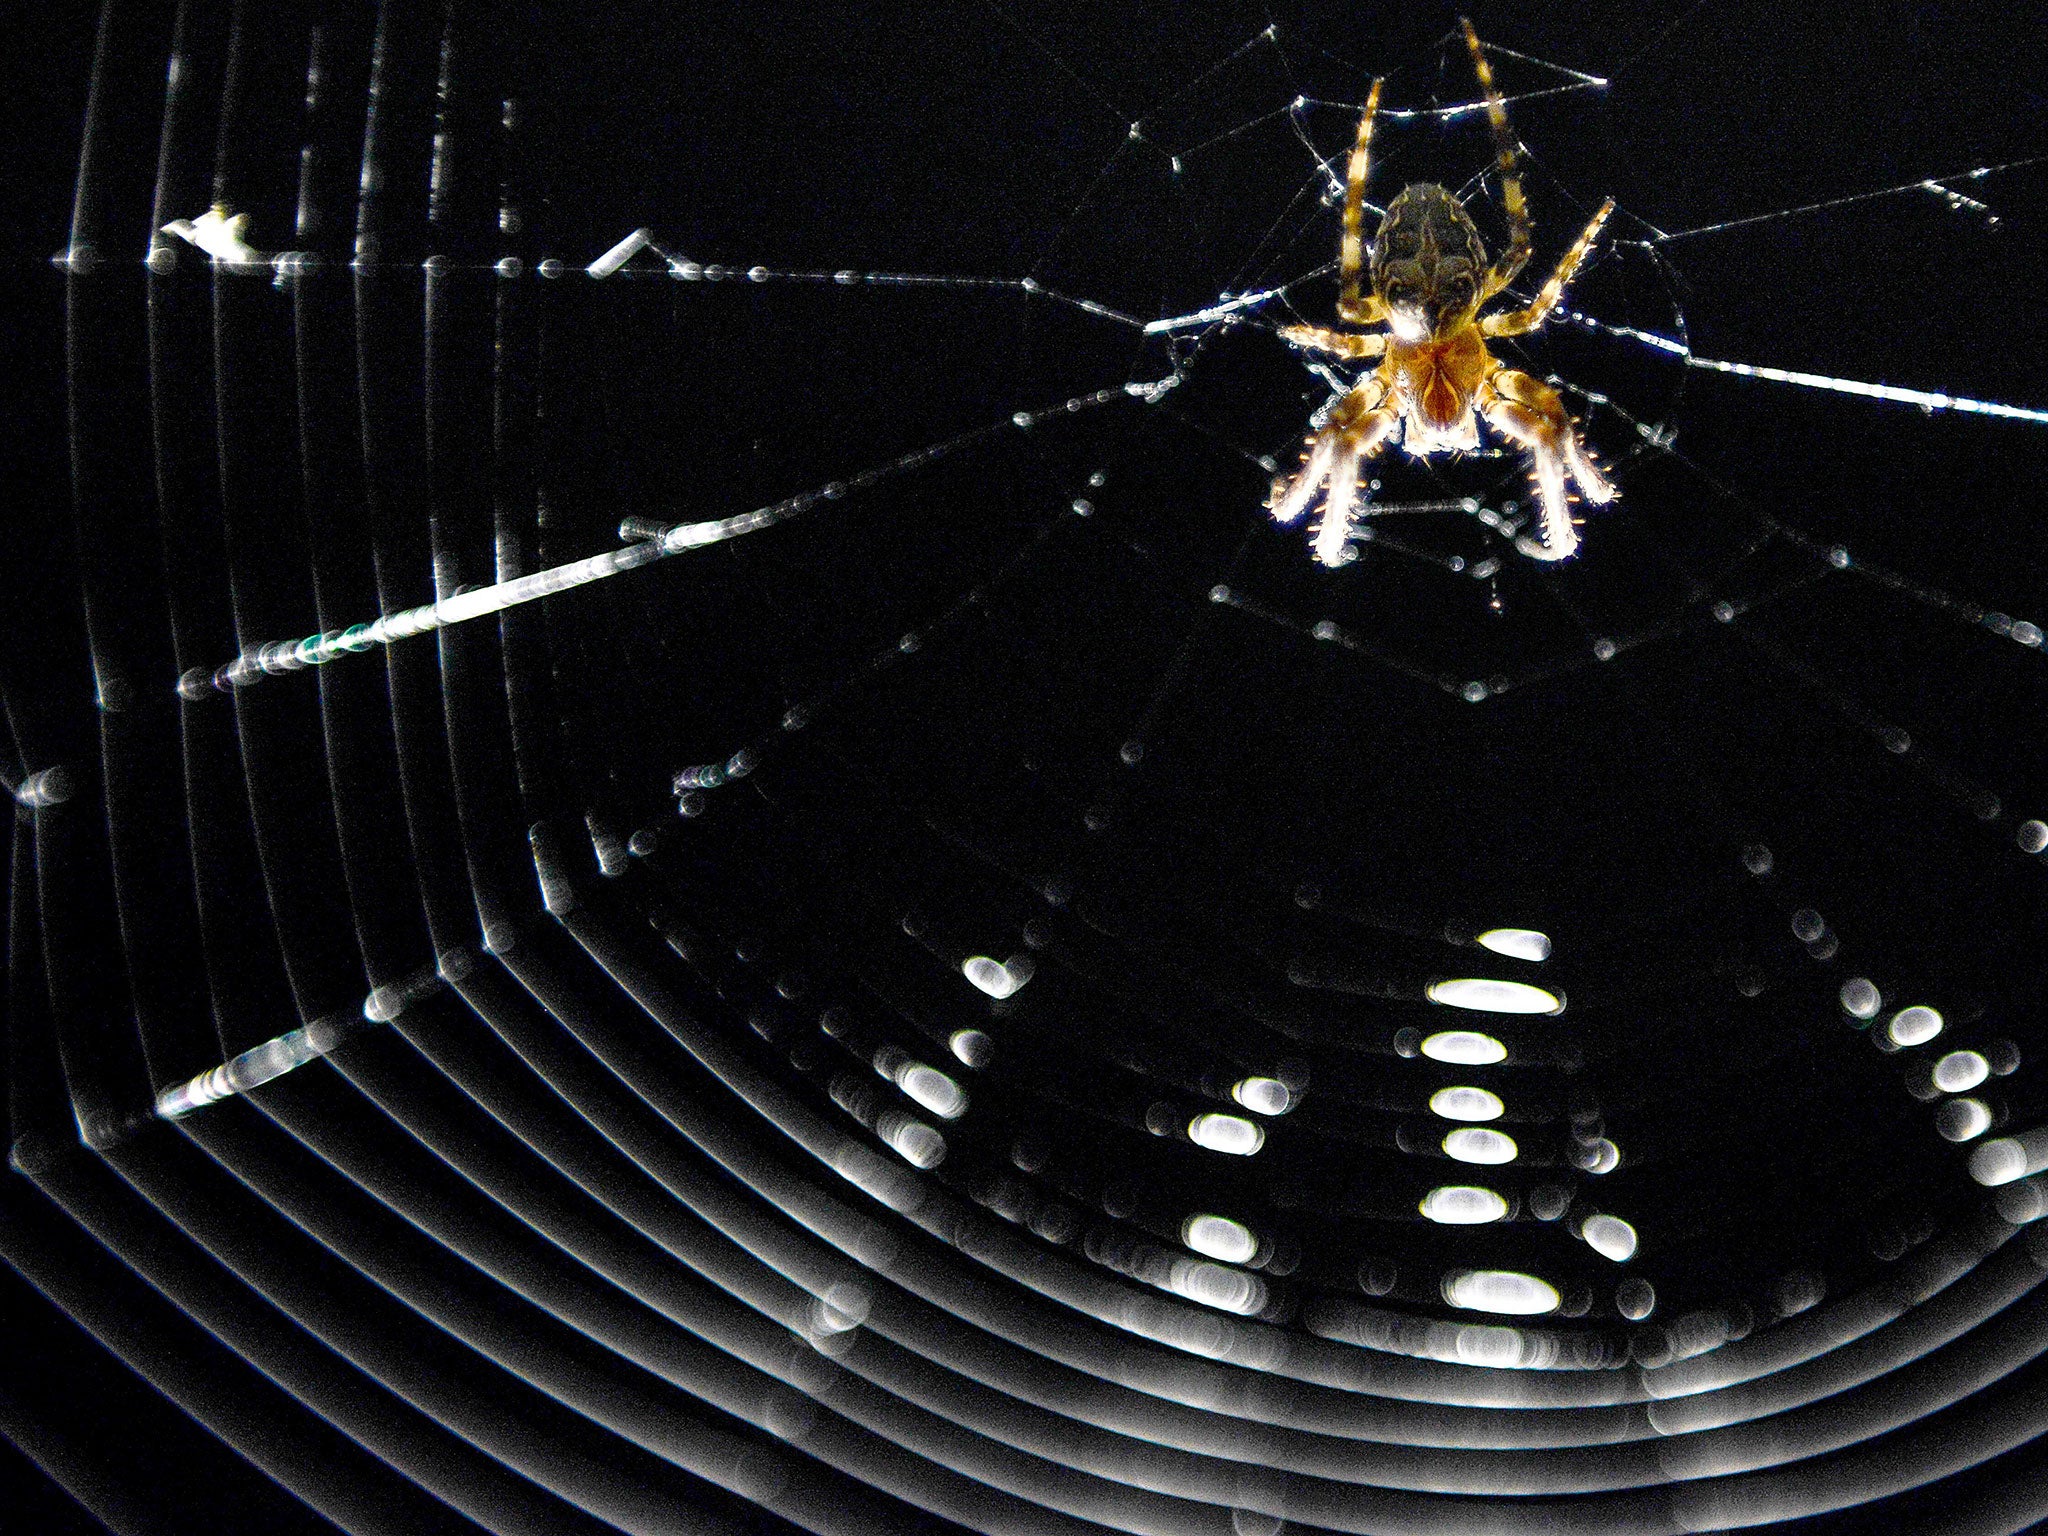 A spider in its net is seen on June 8, 2014 in Bamberg, Germany.